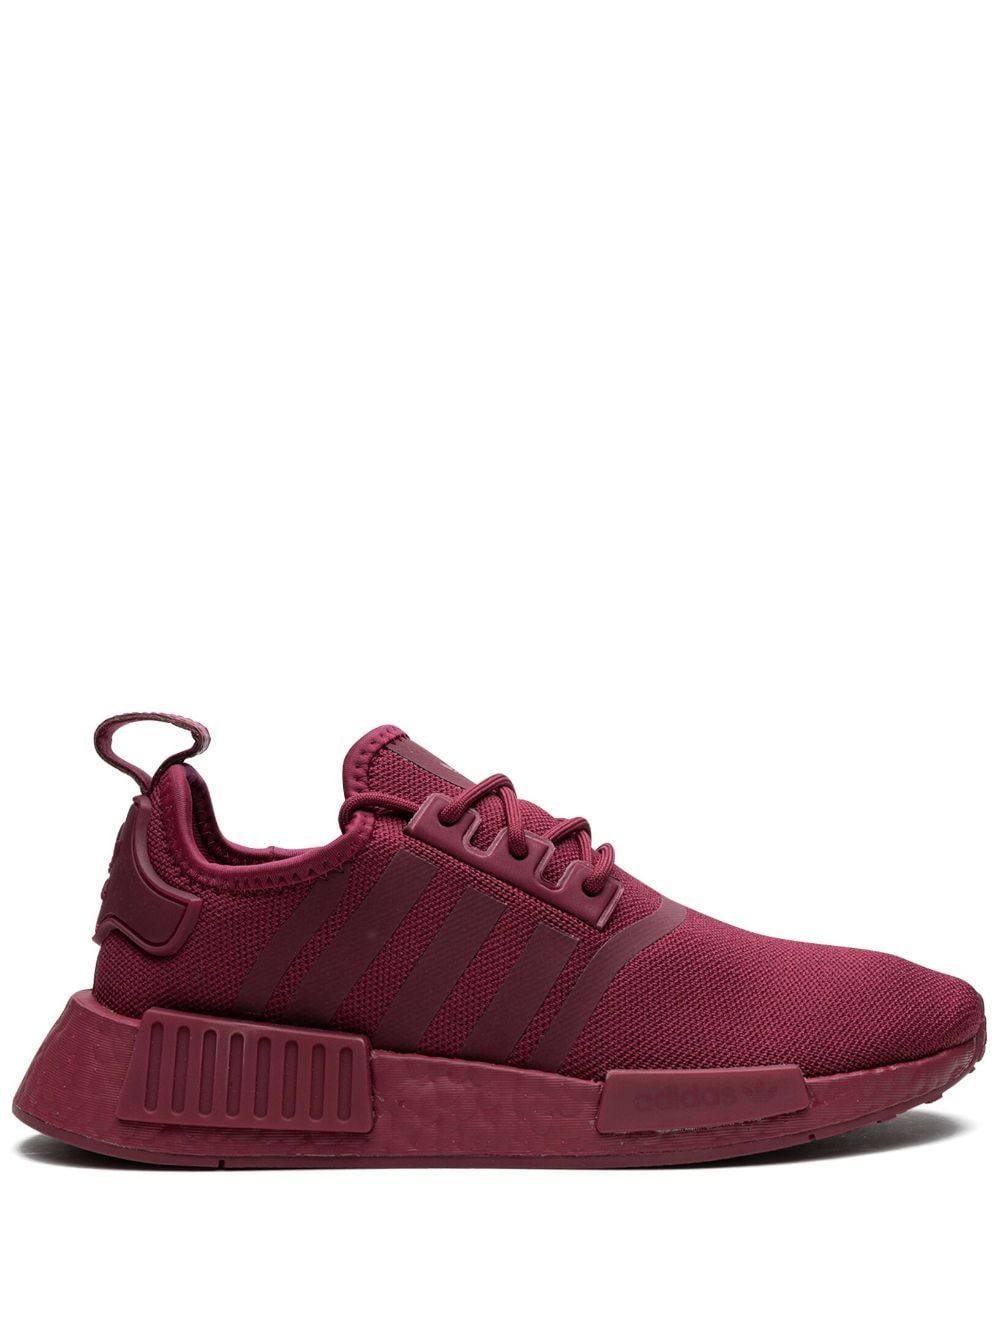 adidas NMD R1 low-top sneakers - Red von adidas